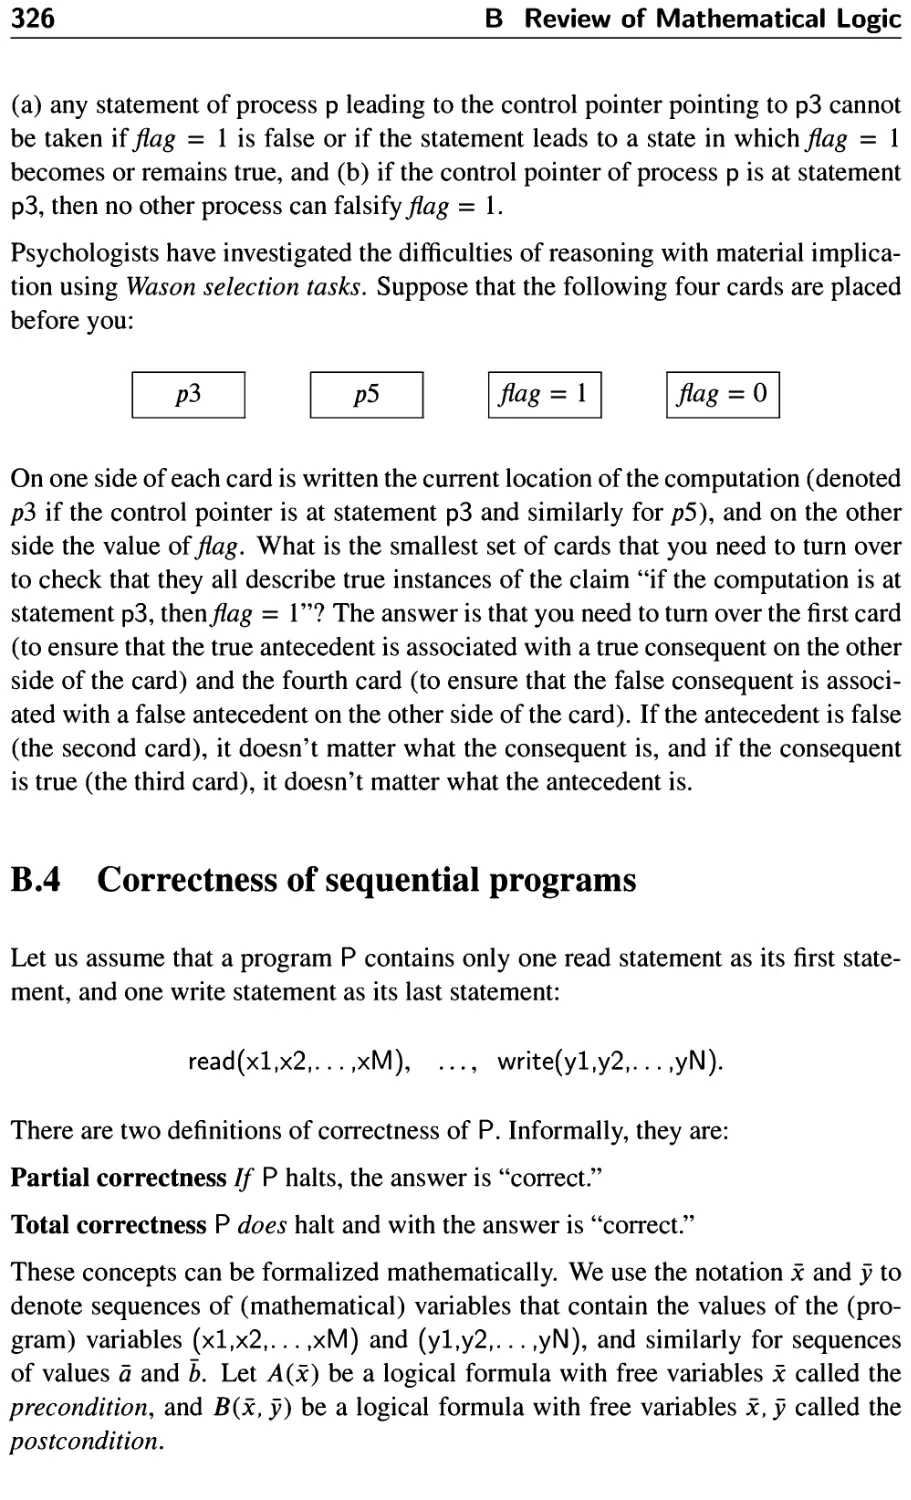 B.4 Correctness of sequential programs